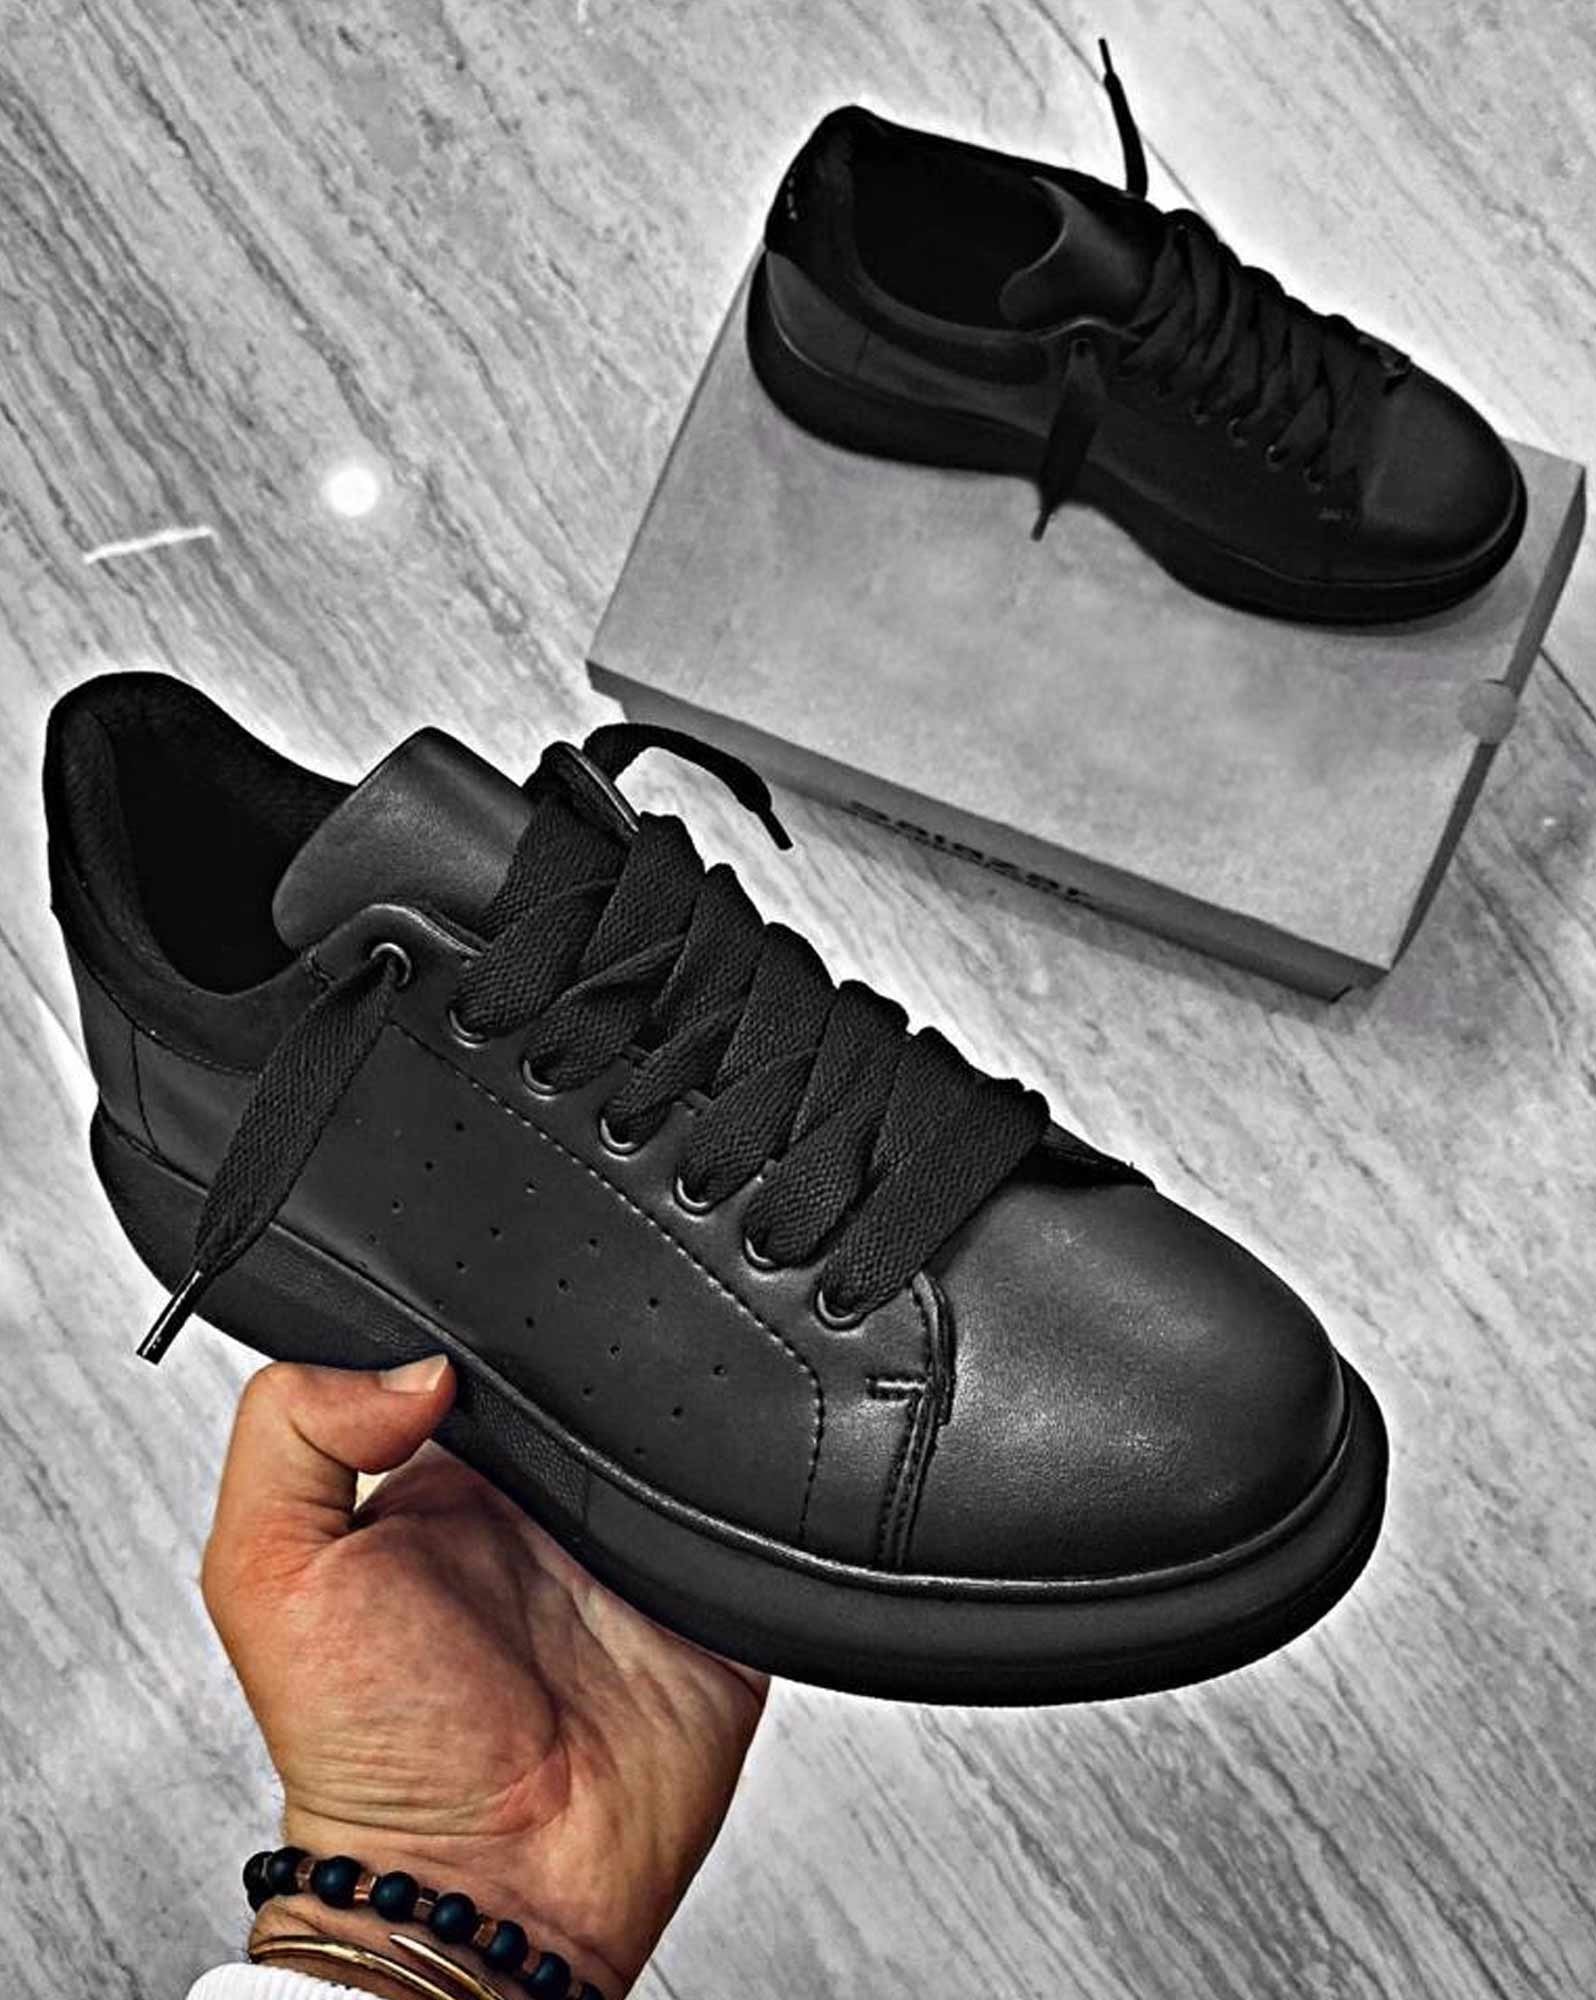 Pair of black sneakers with black rubber sole